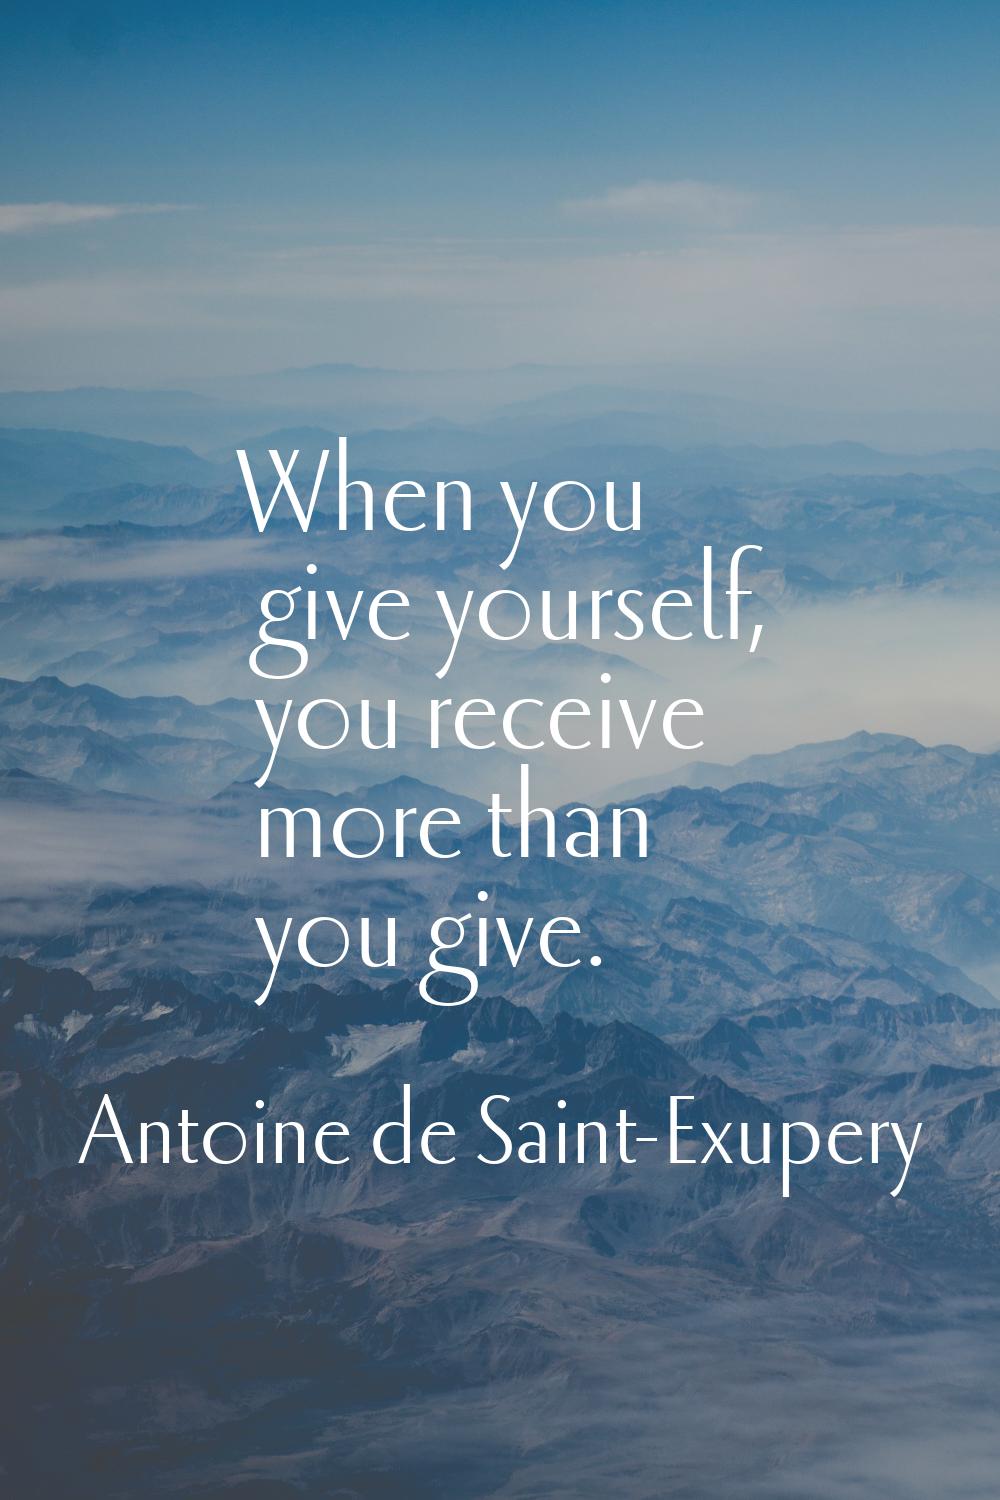 When you give yourself, you receive more than you give.